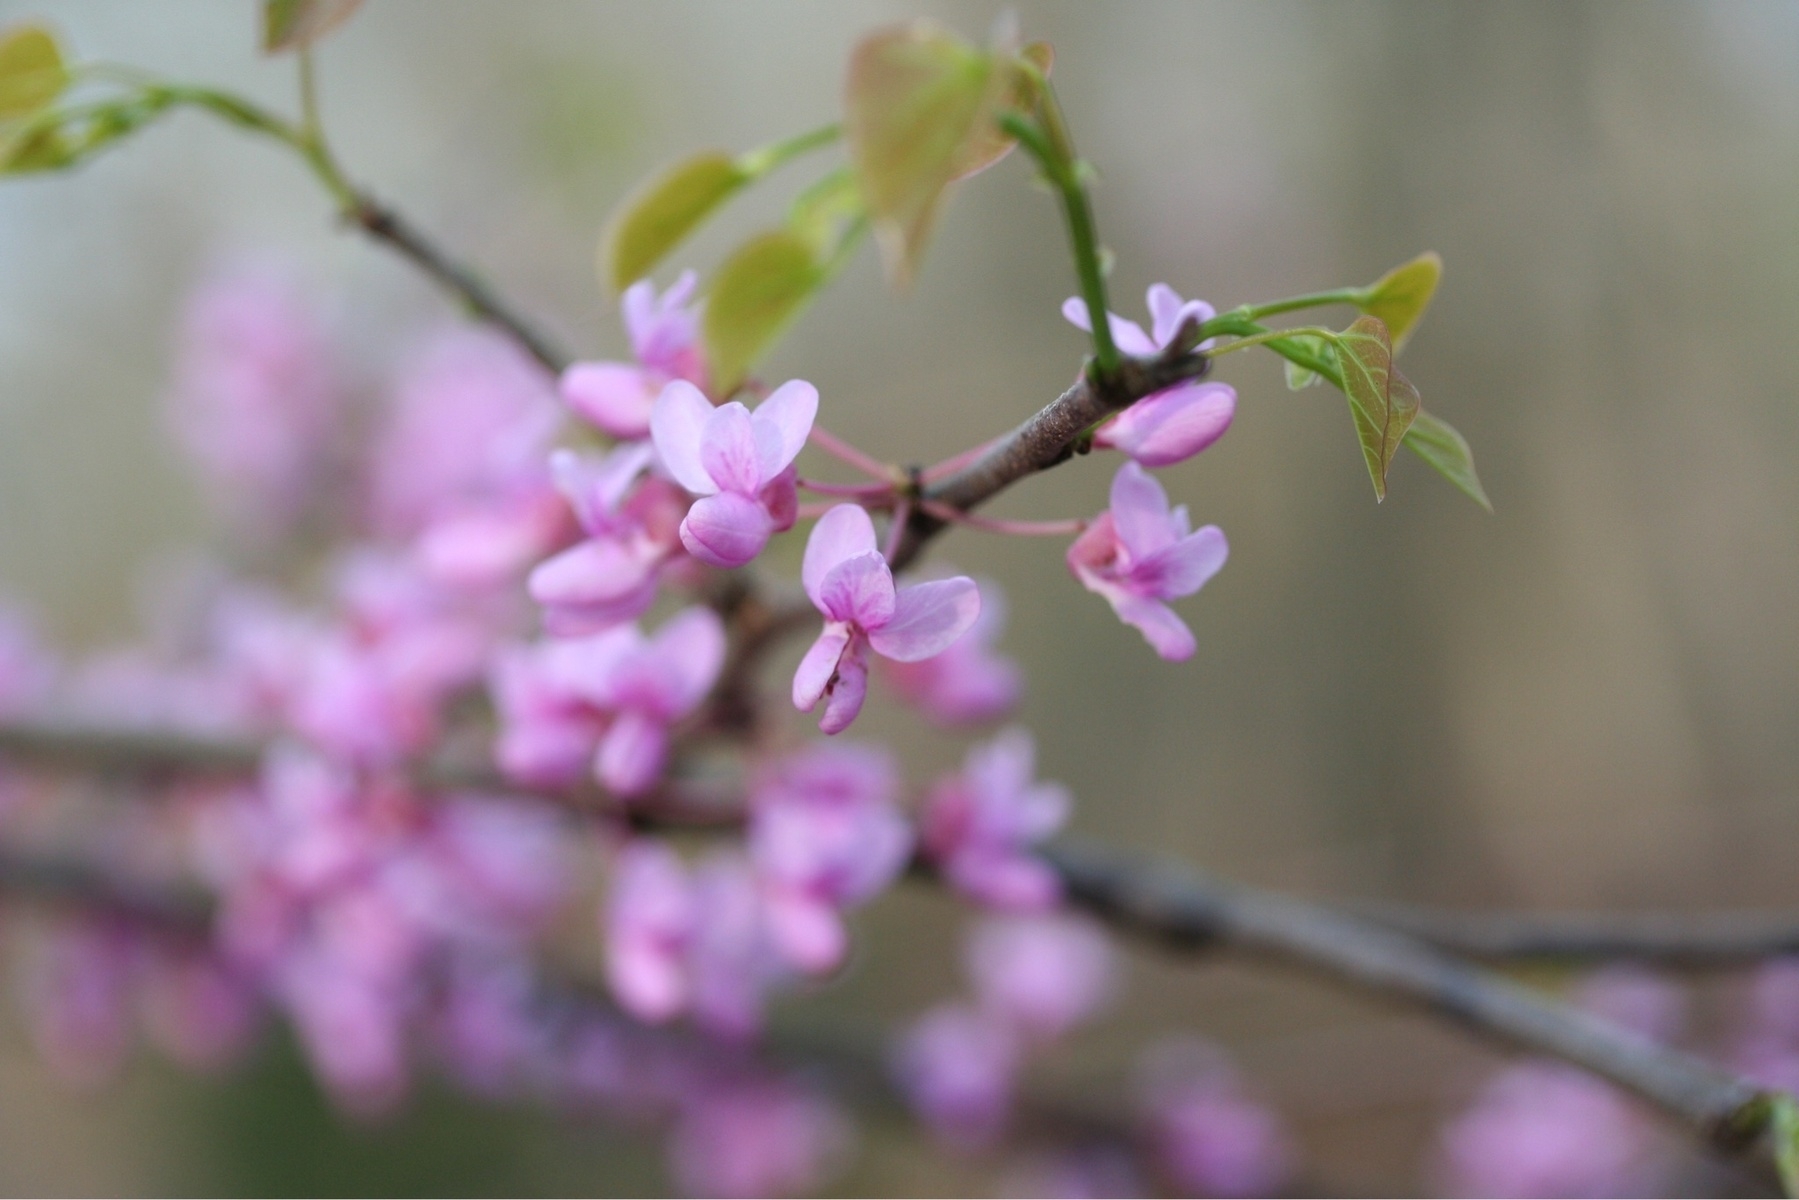 soft, pink flowers of the red bud tree. The picture is soft with a dreamy paint effect due to the  shallow depth of field. The flowers have three petals at the top with a bulbous bottom formation.